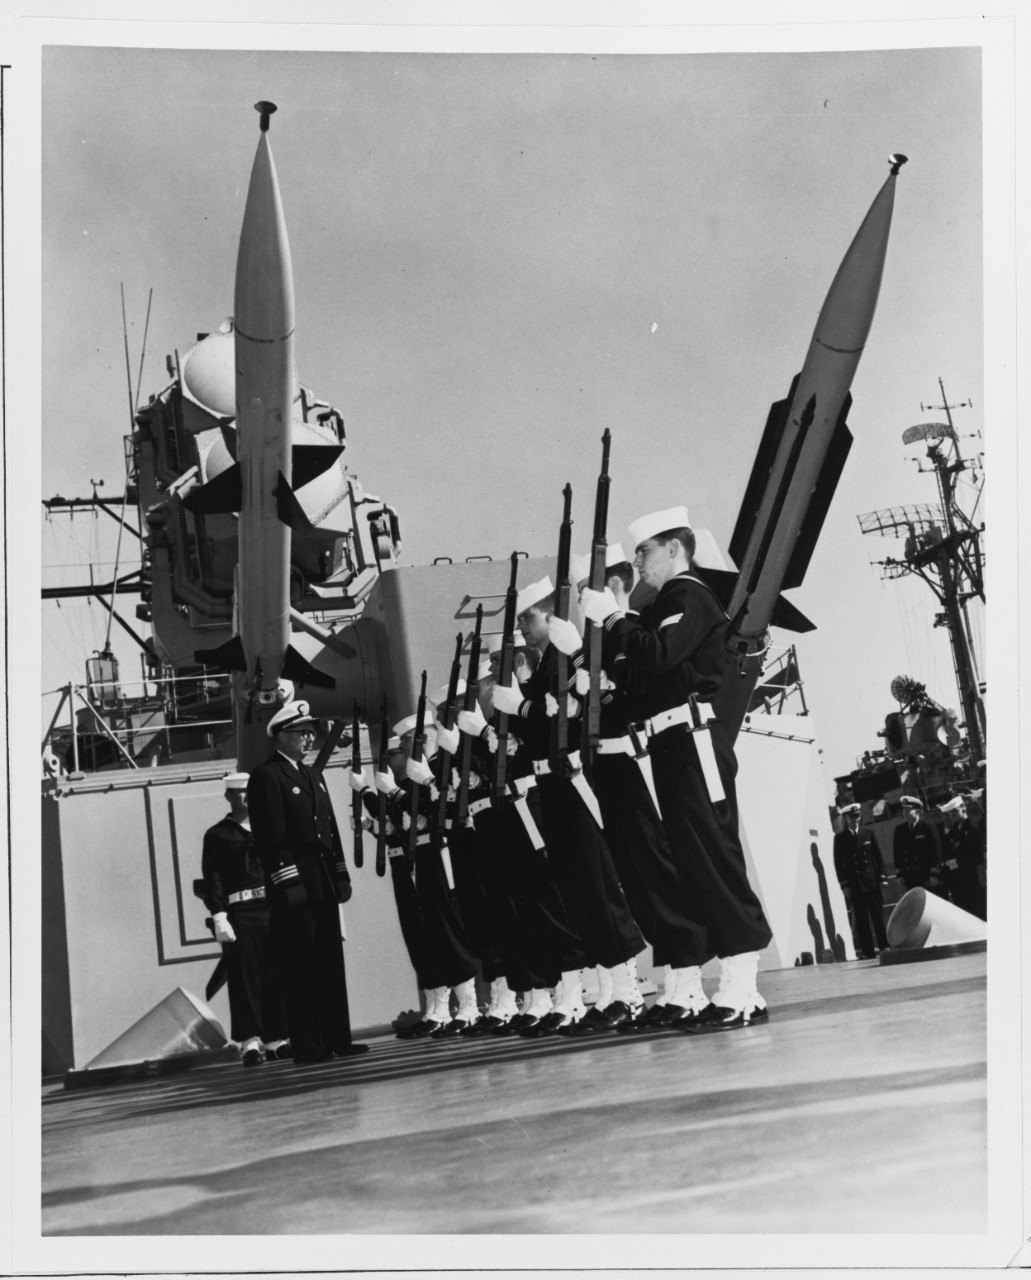 Terrier Missile aboard DLG's tied up at San Diego Harbor, California. With personnel in formation for rifle inspection. 5/19/1961